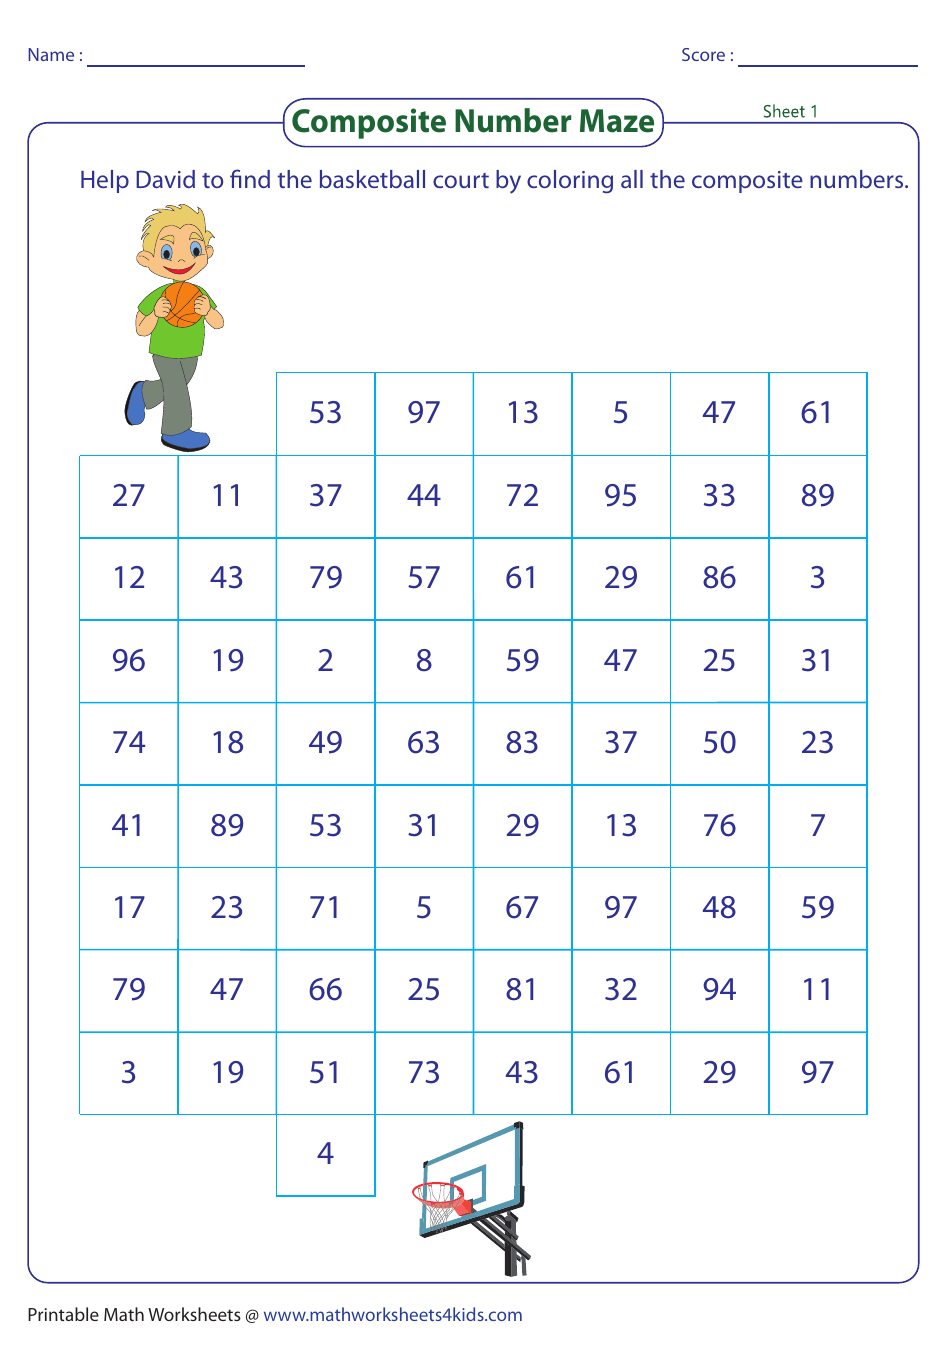 composite-number-maze-worksheet-with-answer-key-download-printable-pdf-templateroller